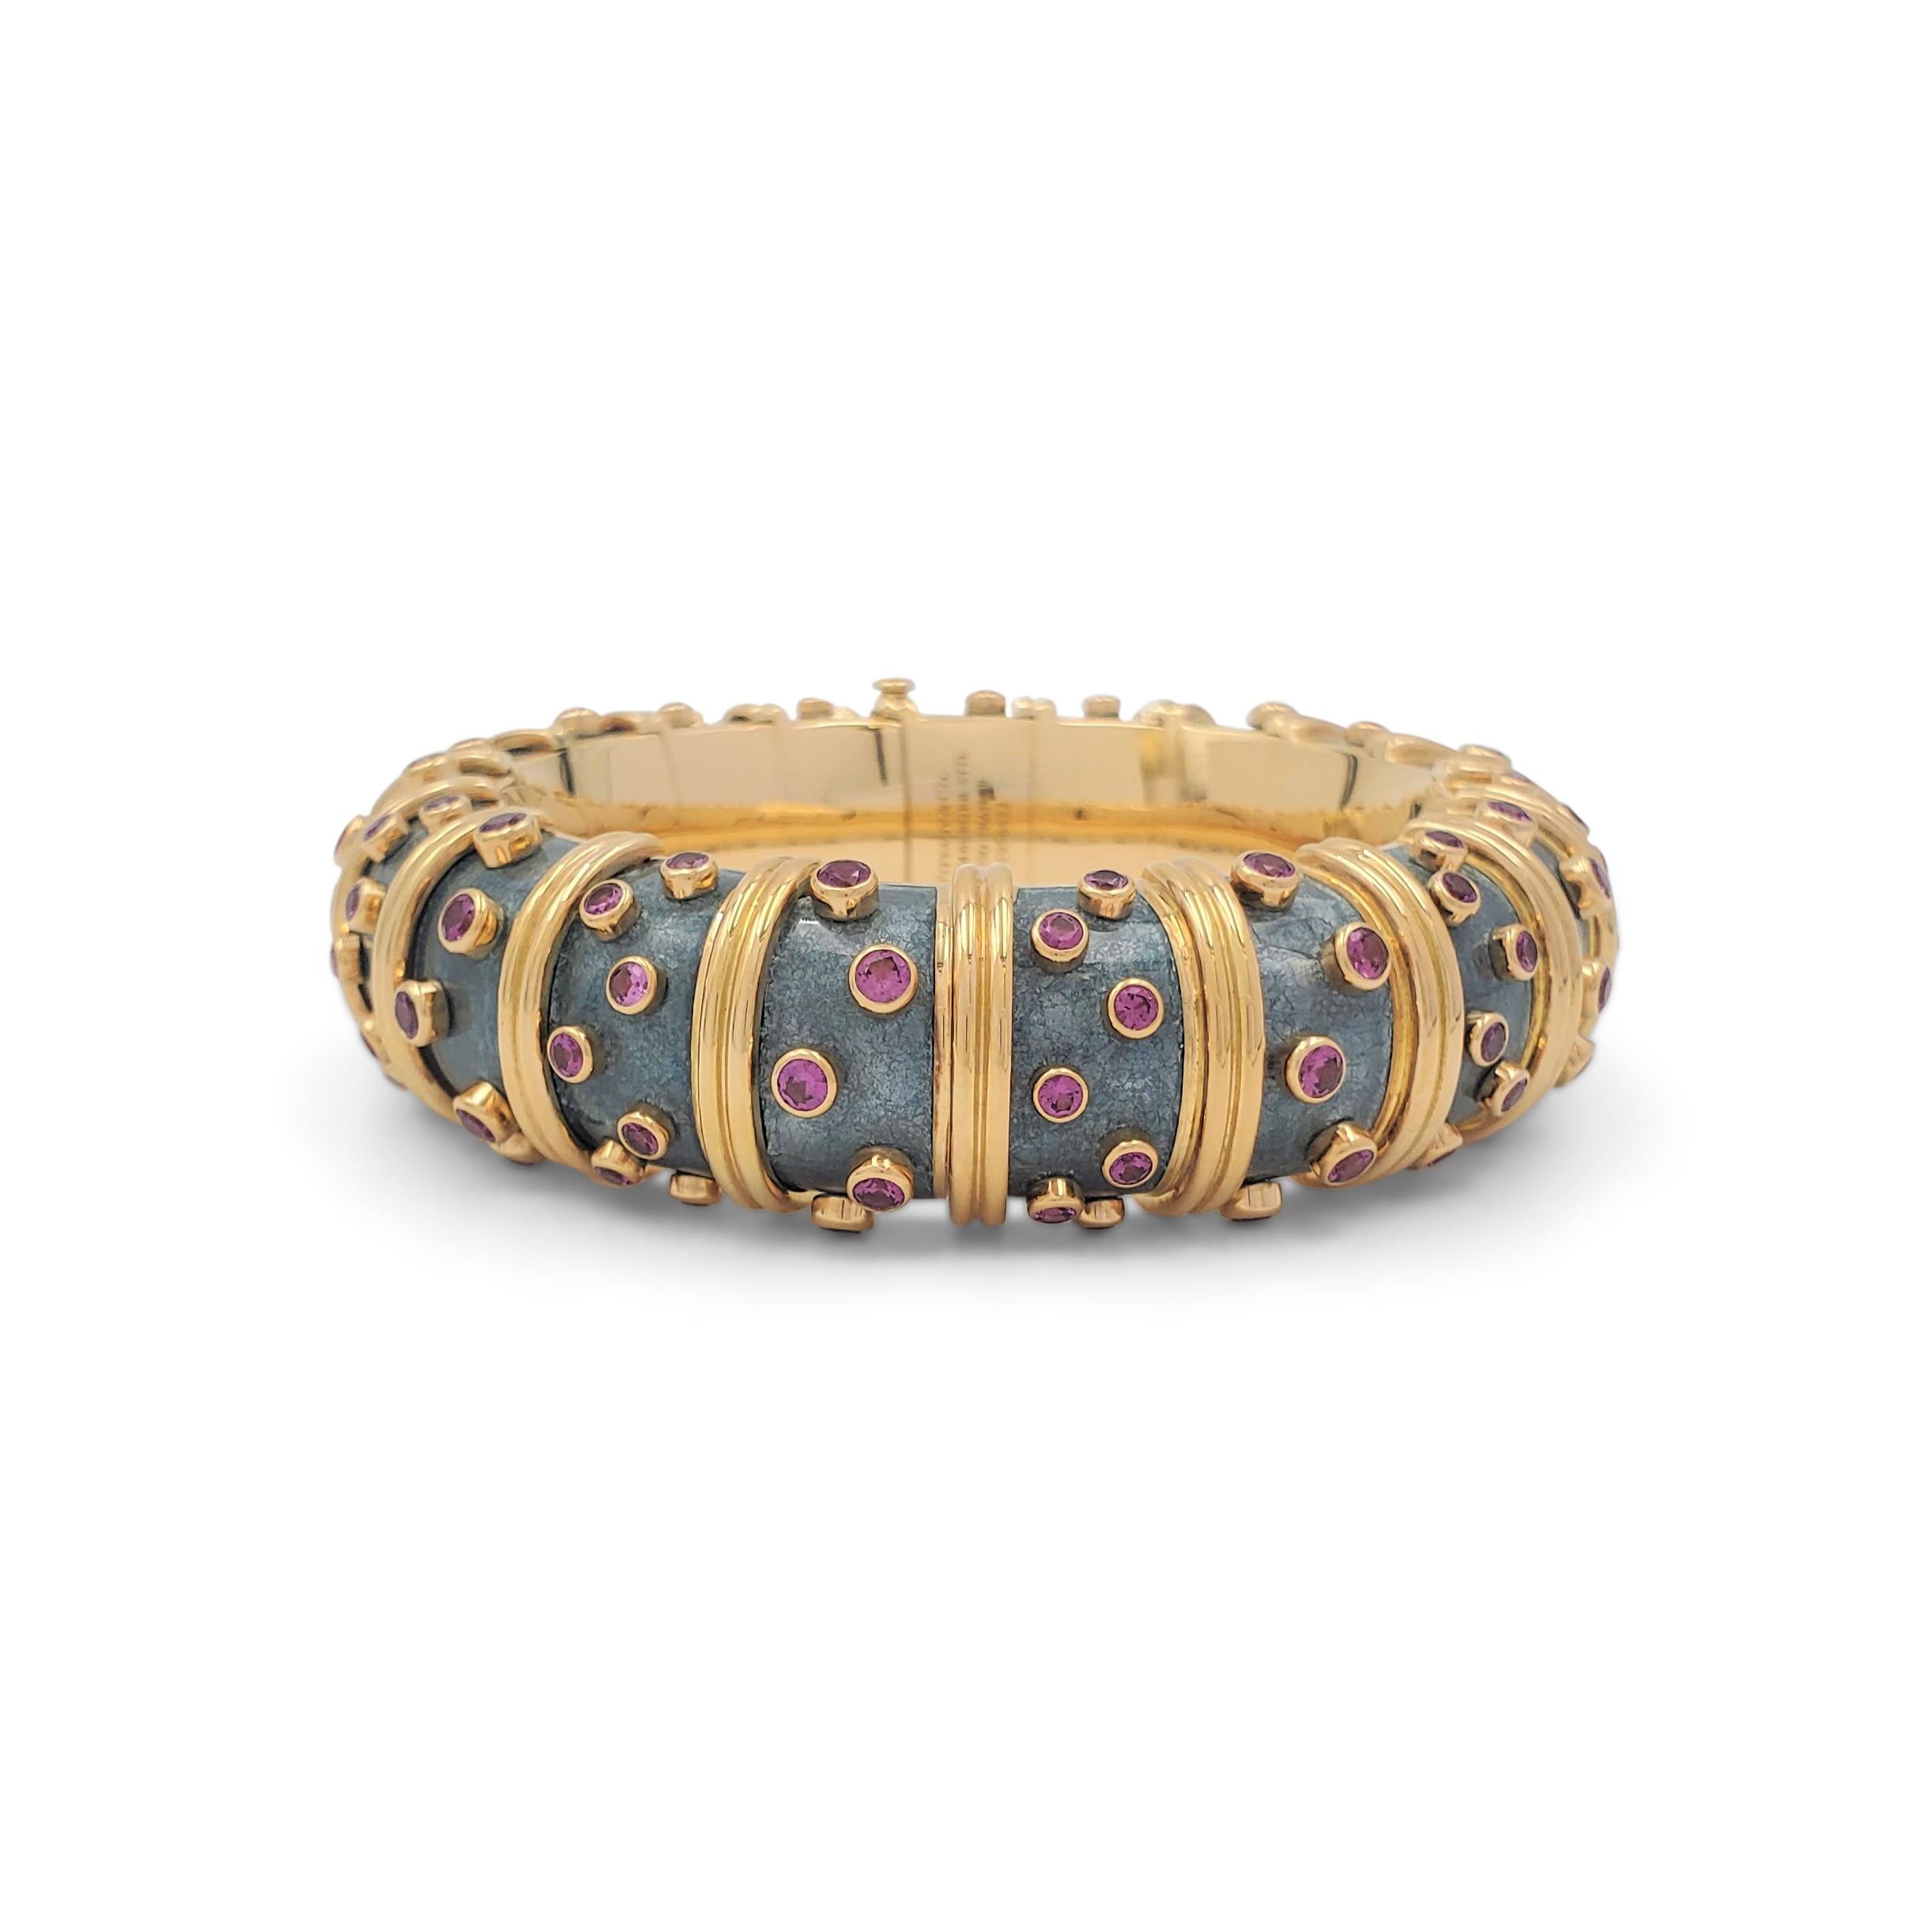 An iconic 'Jackie' bracelet designed by Jean Schlumberger for Tiffany & Co. The articulated link bombe bracelet is crafted in 18 karat yellow gold and features a rare color combination of slate gray paillonné enamel which is accented by raised round